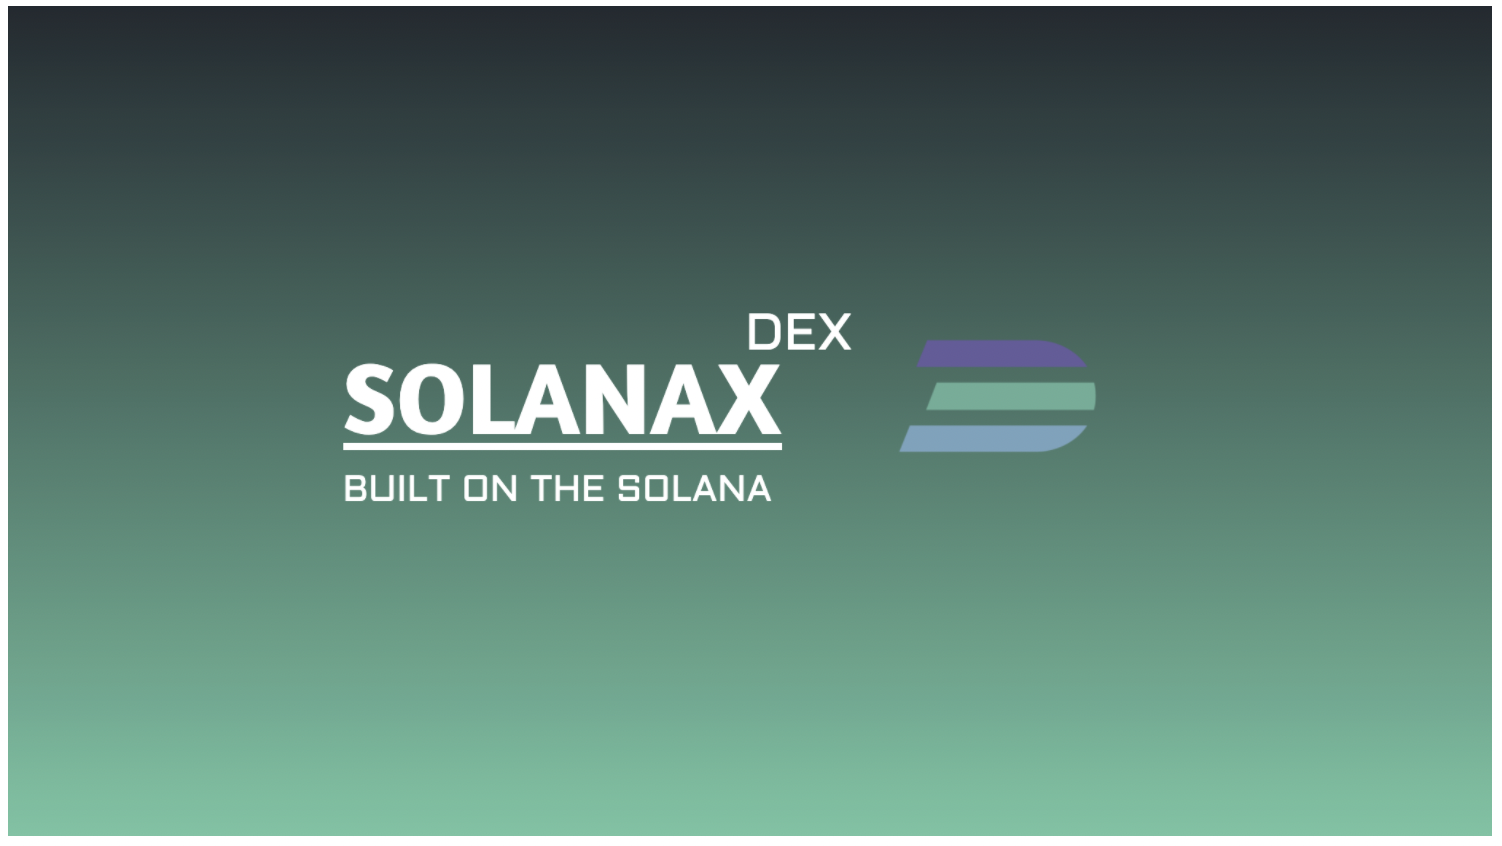 Private Sale For Solanax Ends, The IEO Is On Horizon